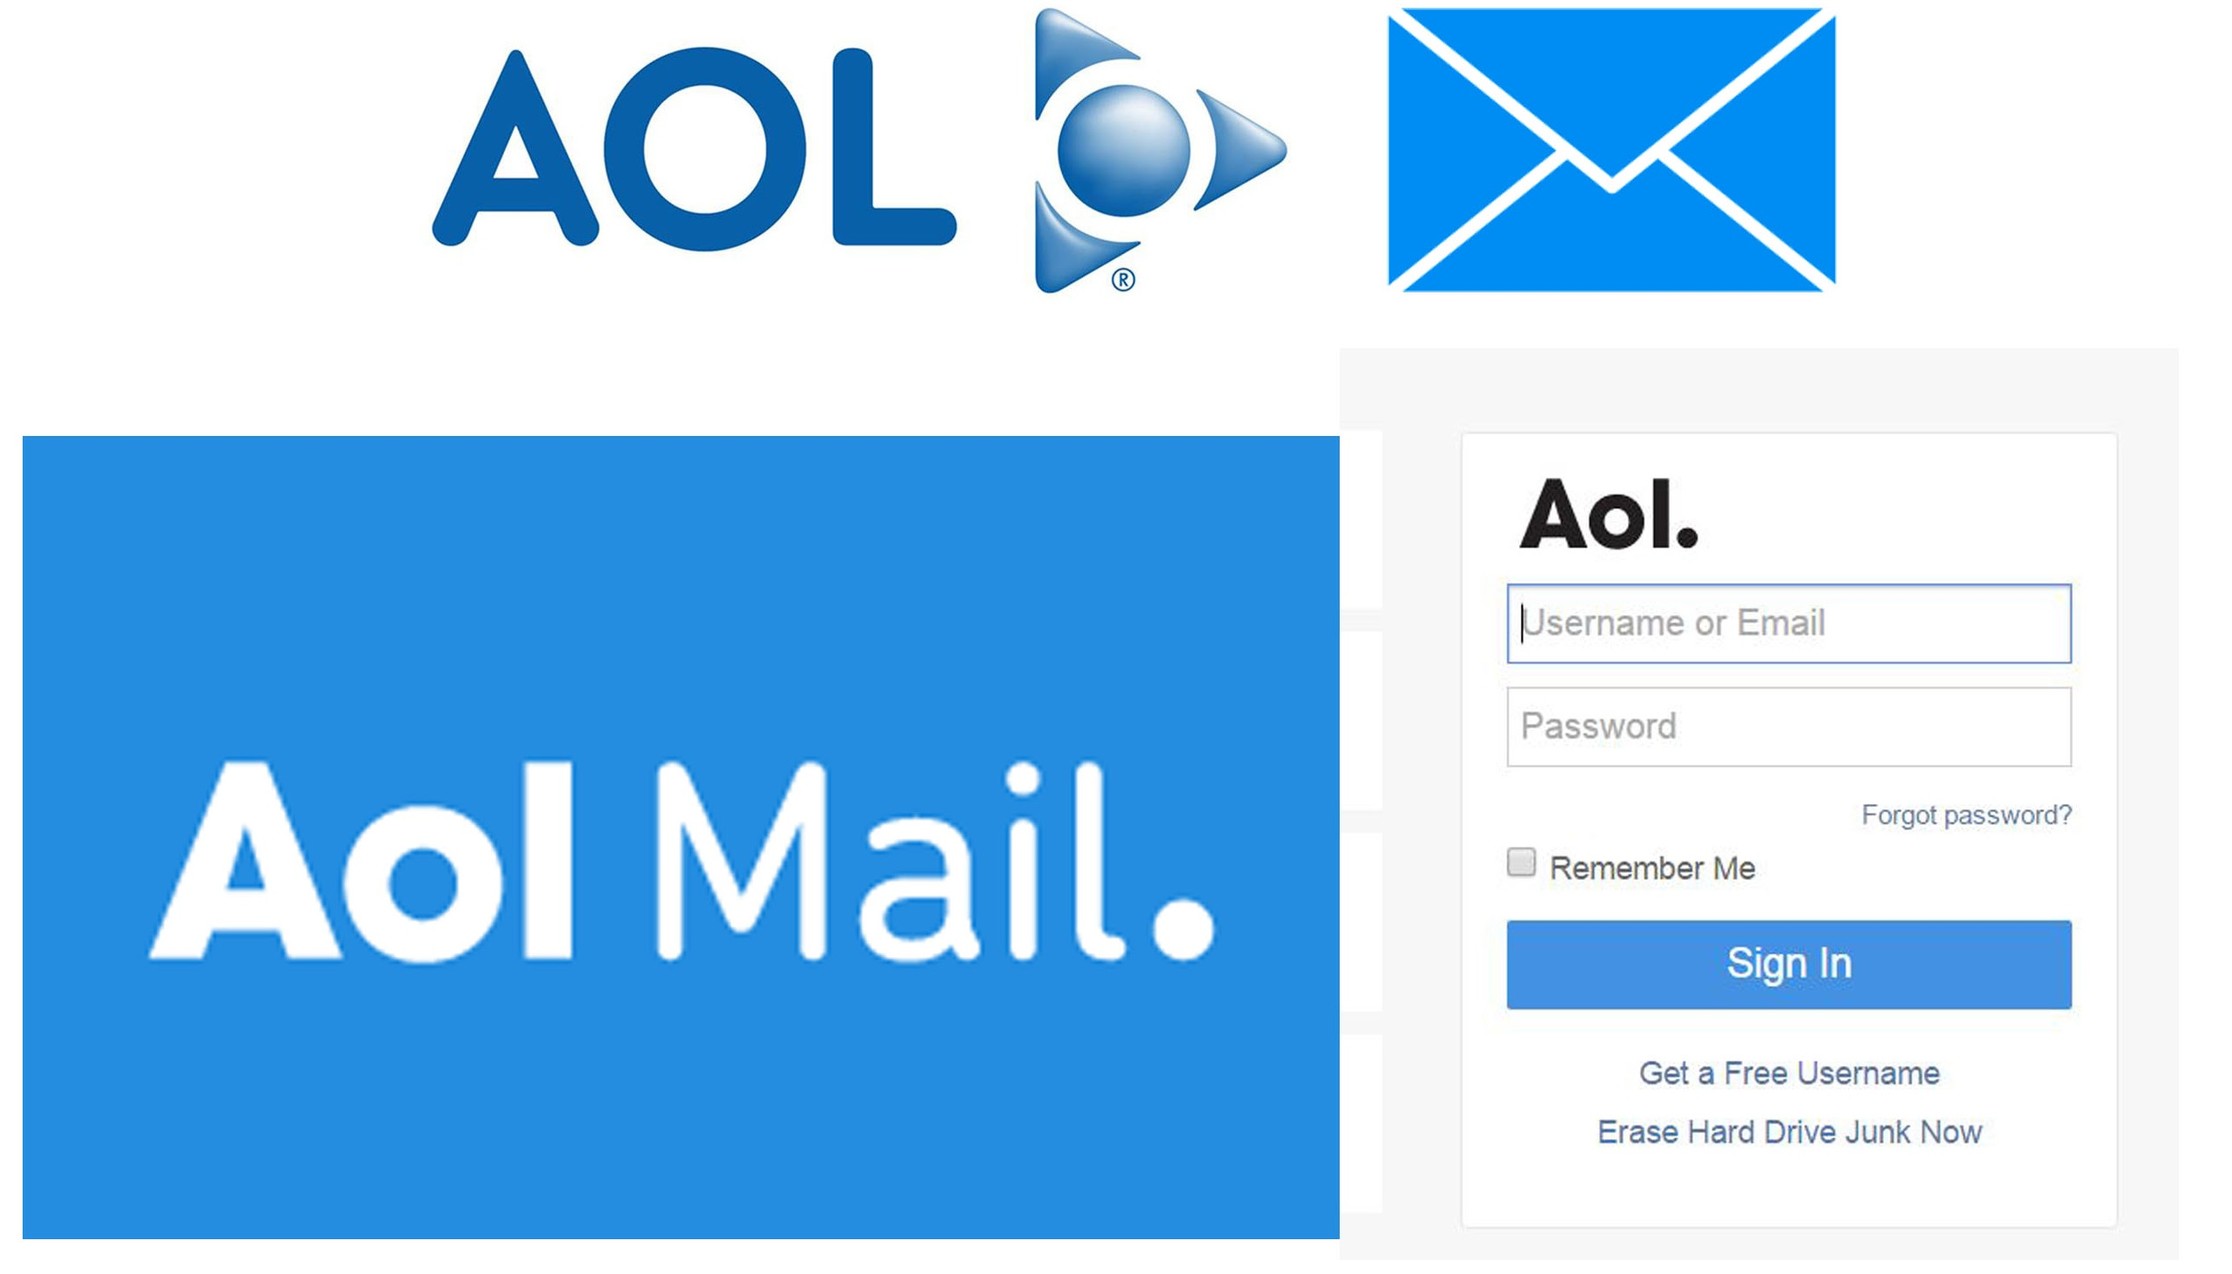 AOL Mail Login Steps to Sign into Aol.com Email Account